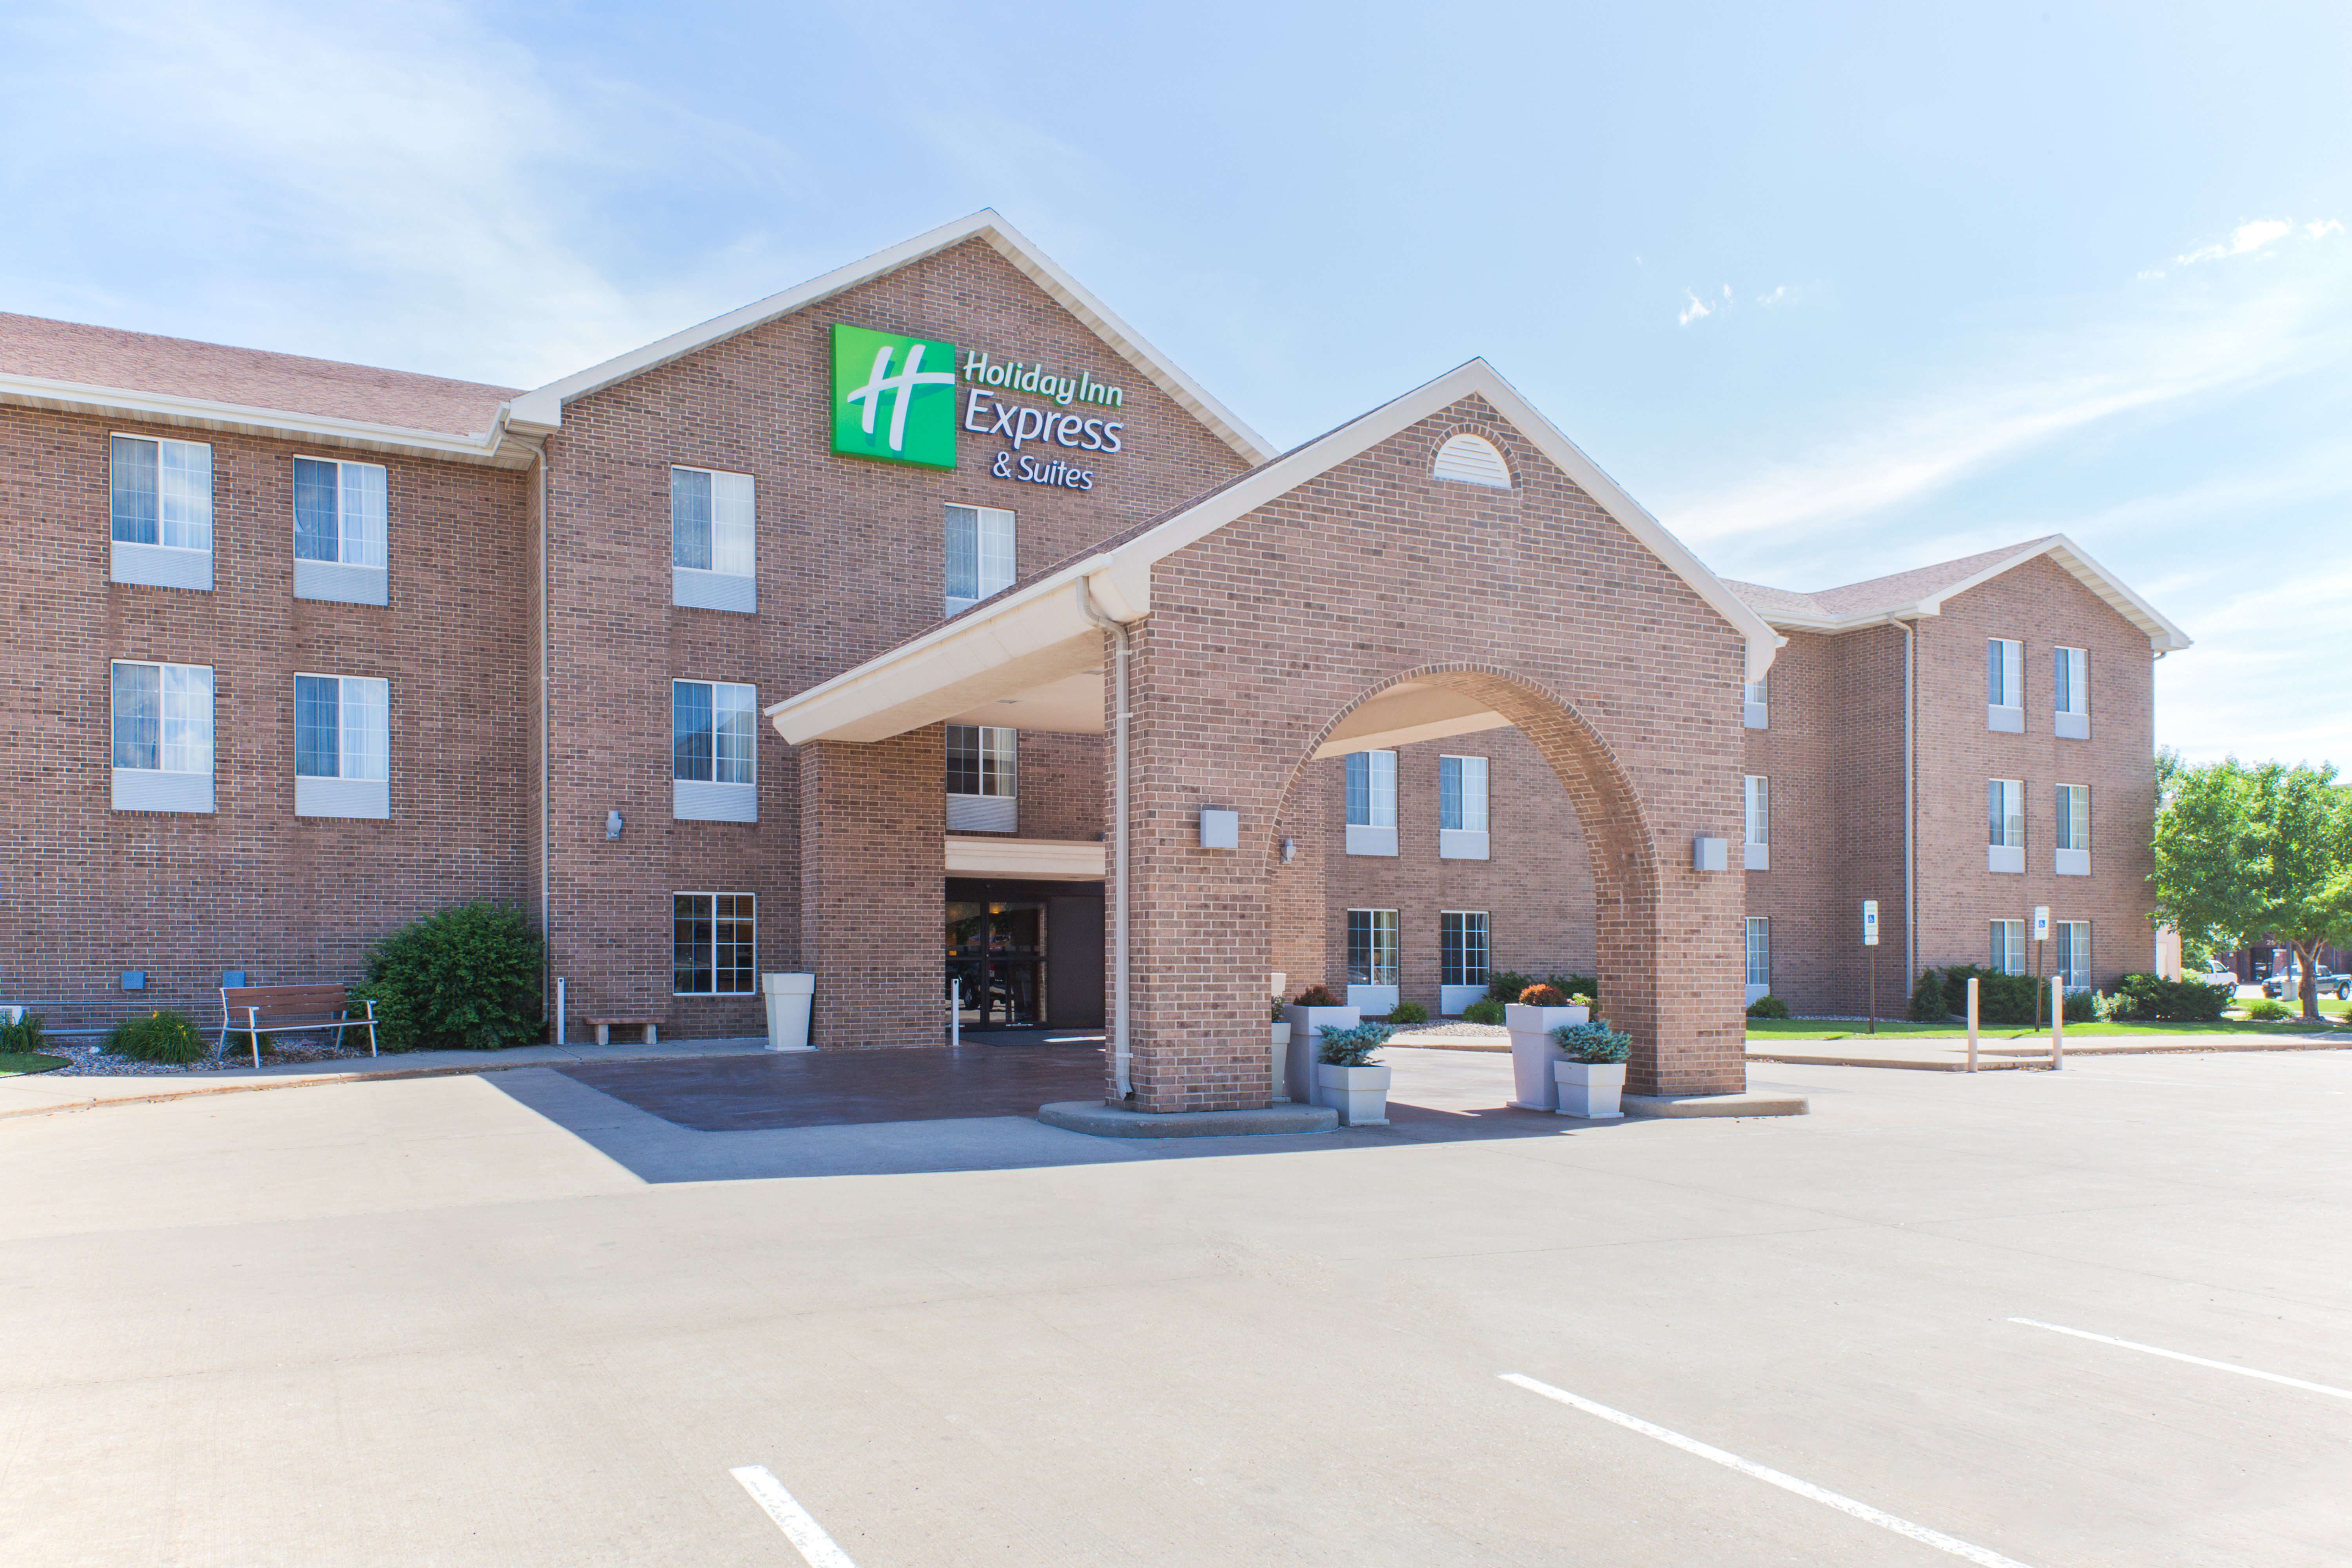 Stay with Holiday Inn Express Hotel & Suites Sioux Falls, SD!